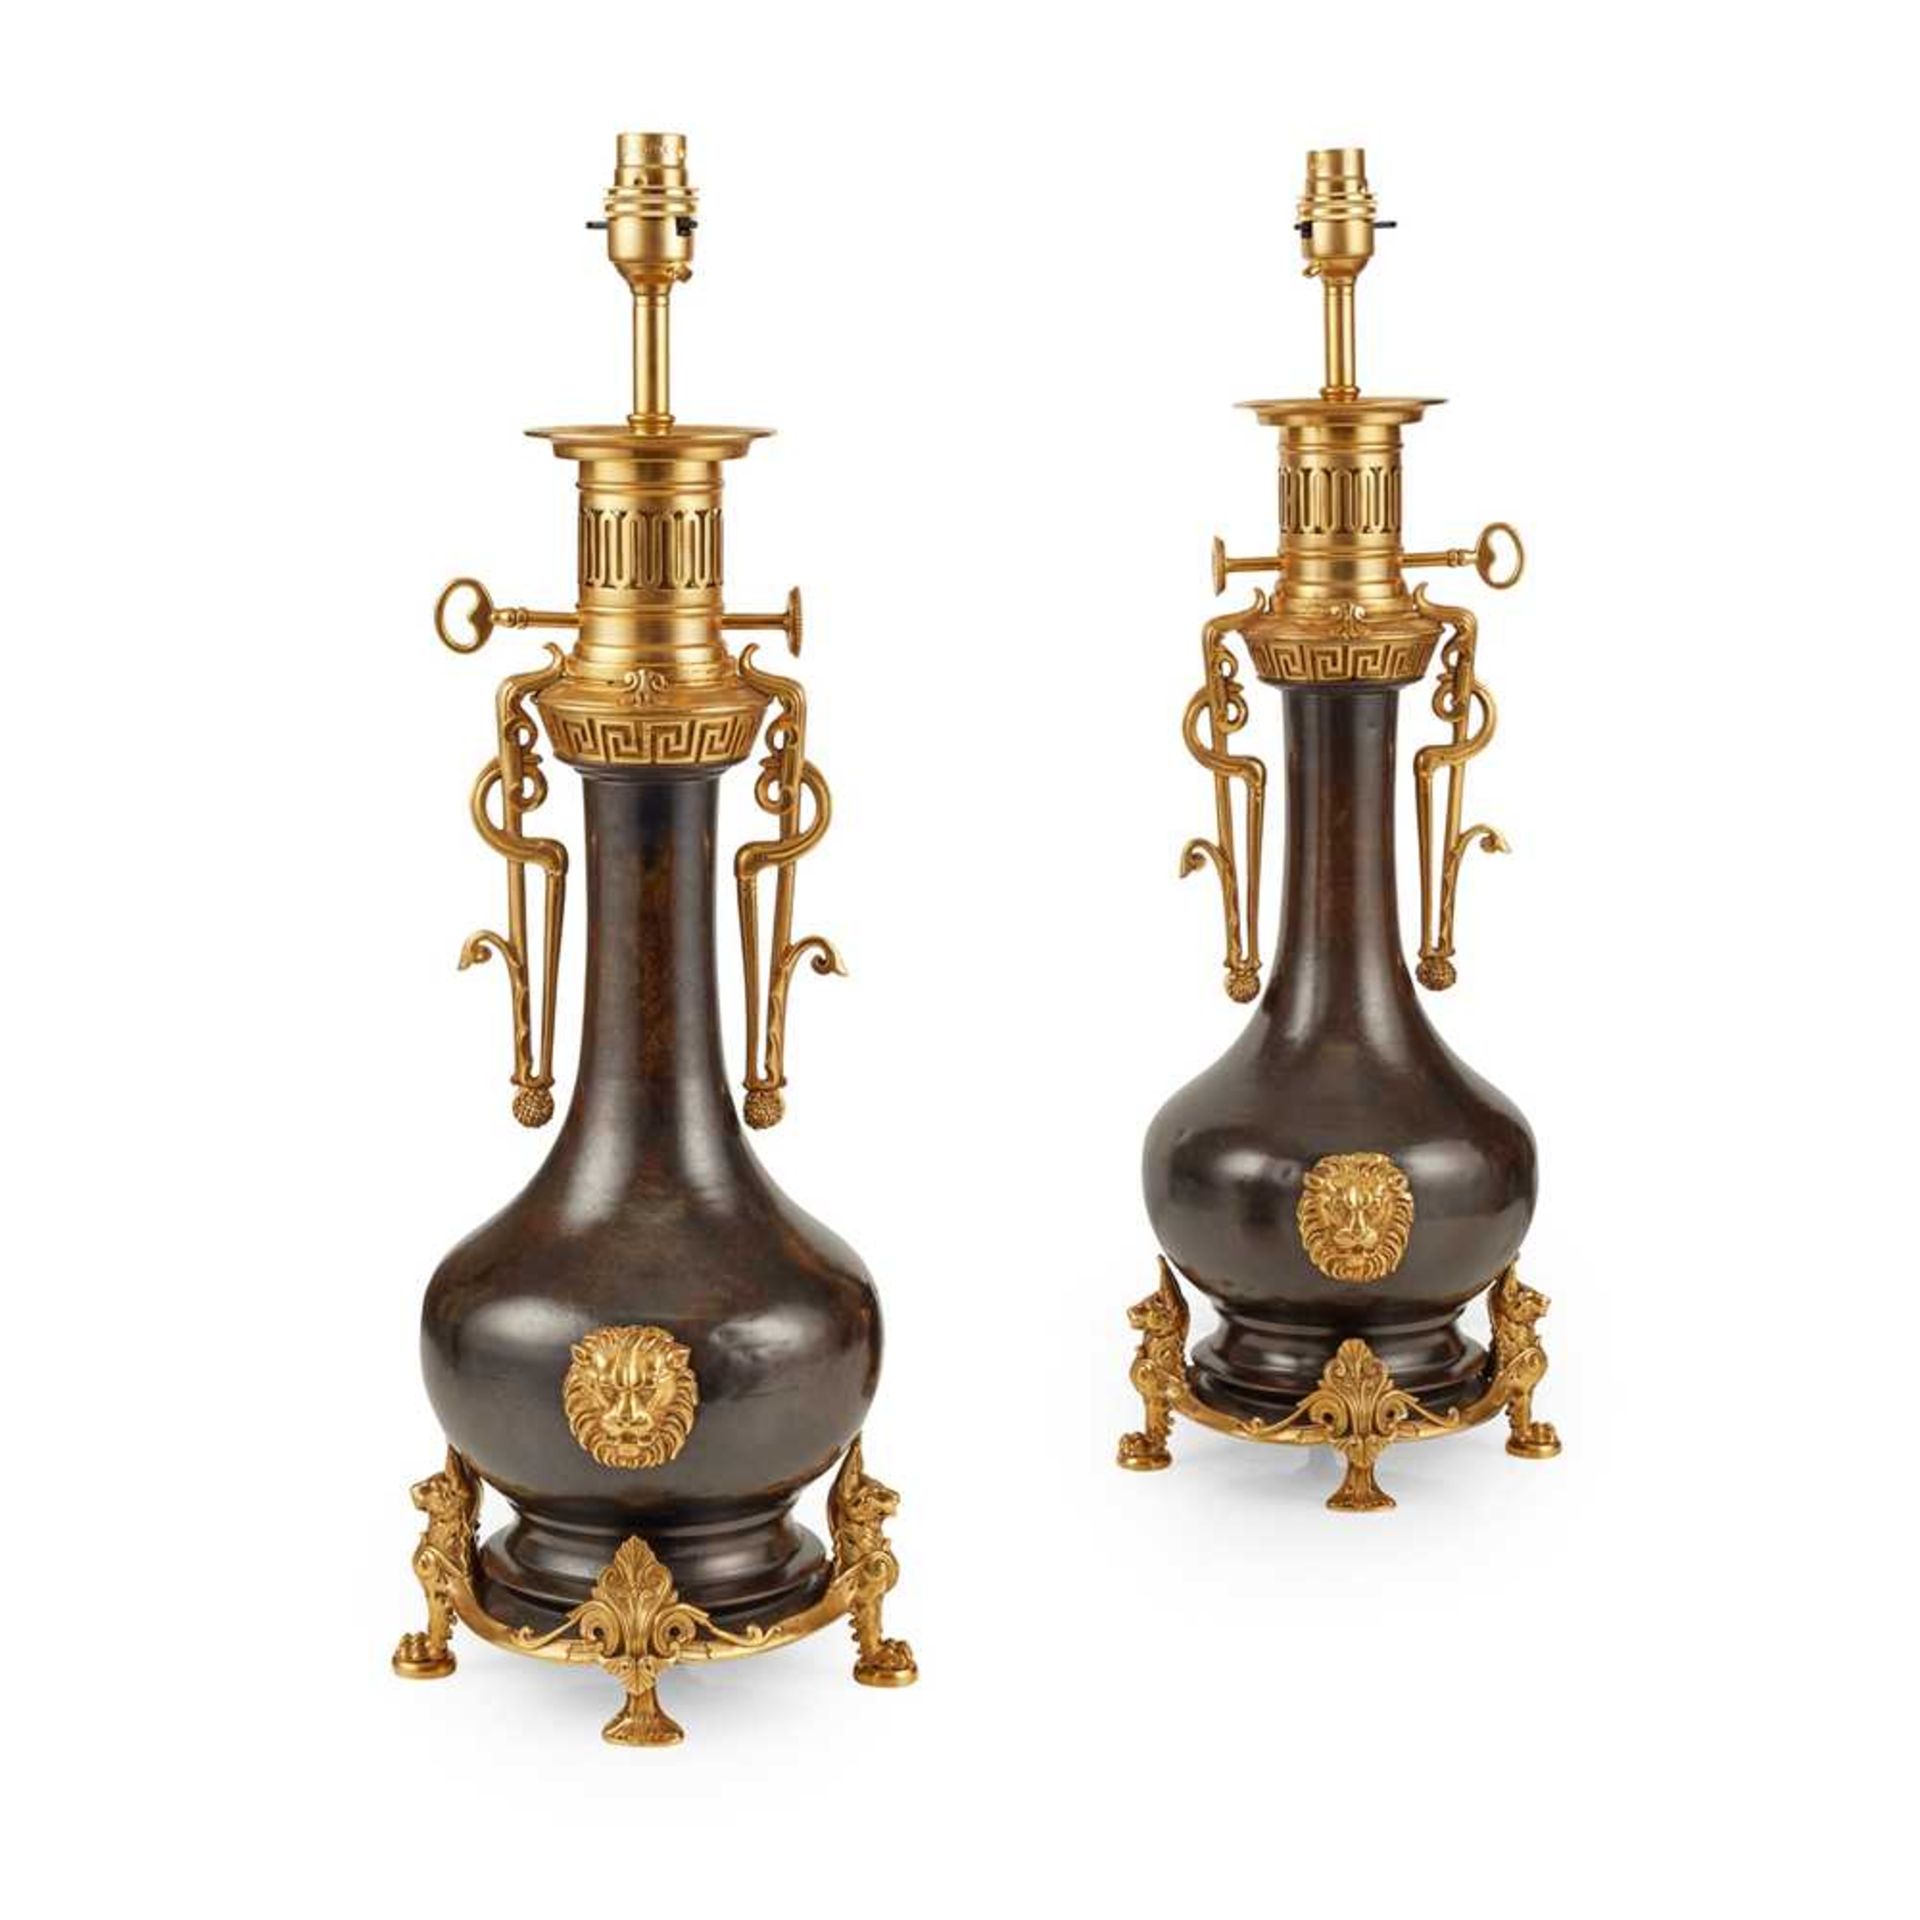 PAIR OF FRENCH GILT AND PATINATED BRONZE MODERATOR LAMPS 19TH CENTURY - Image 2 of 2